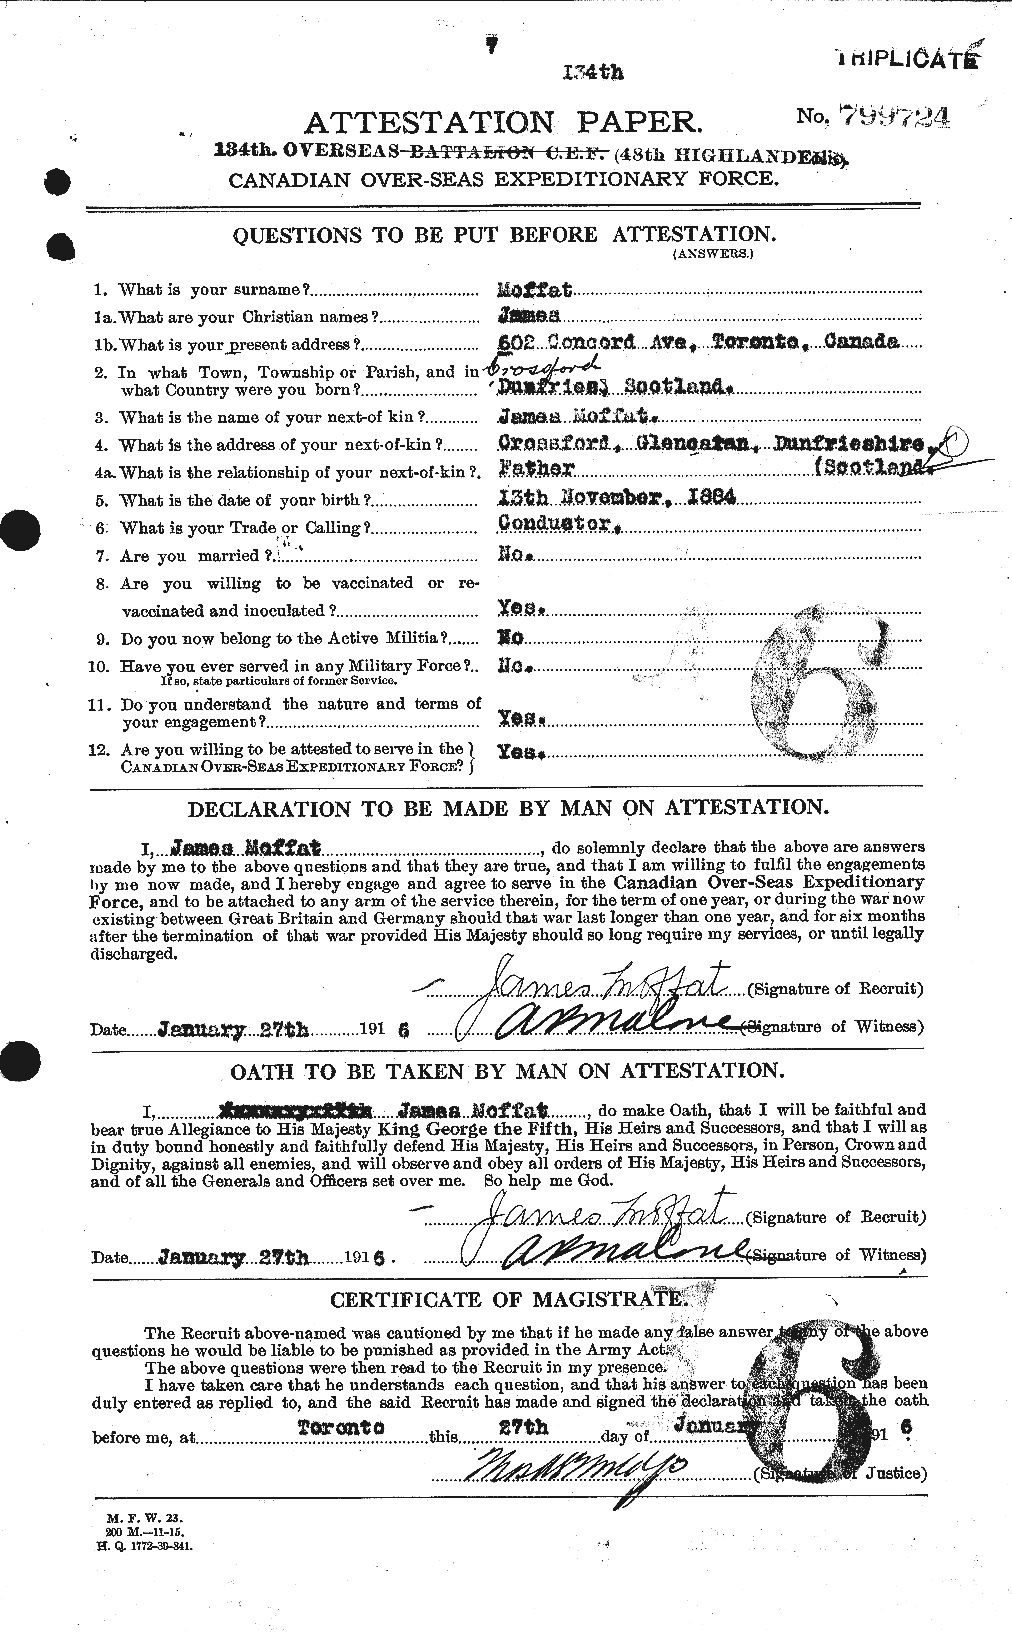 Personnel Records of the First World War - CEF 499033a